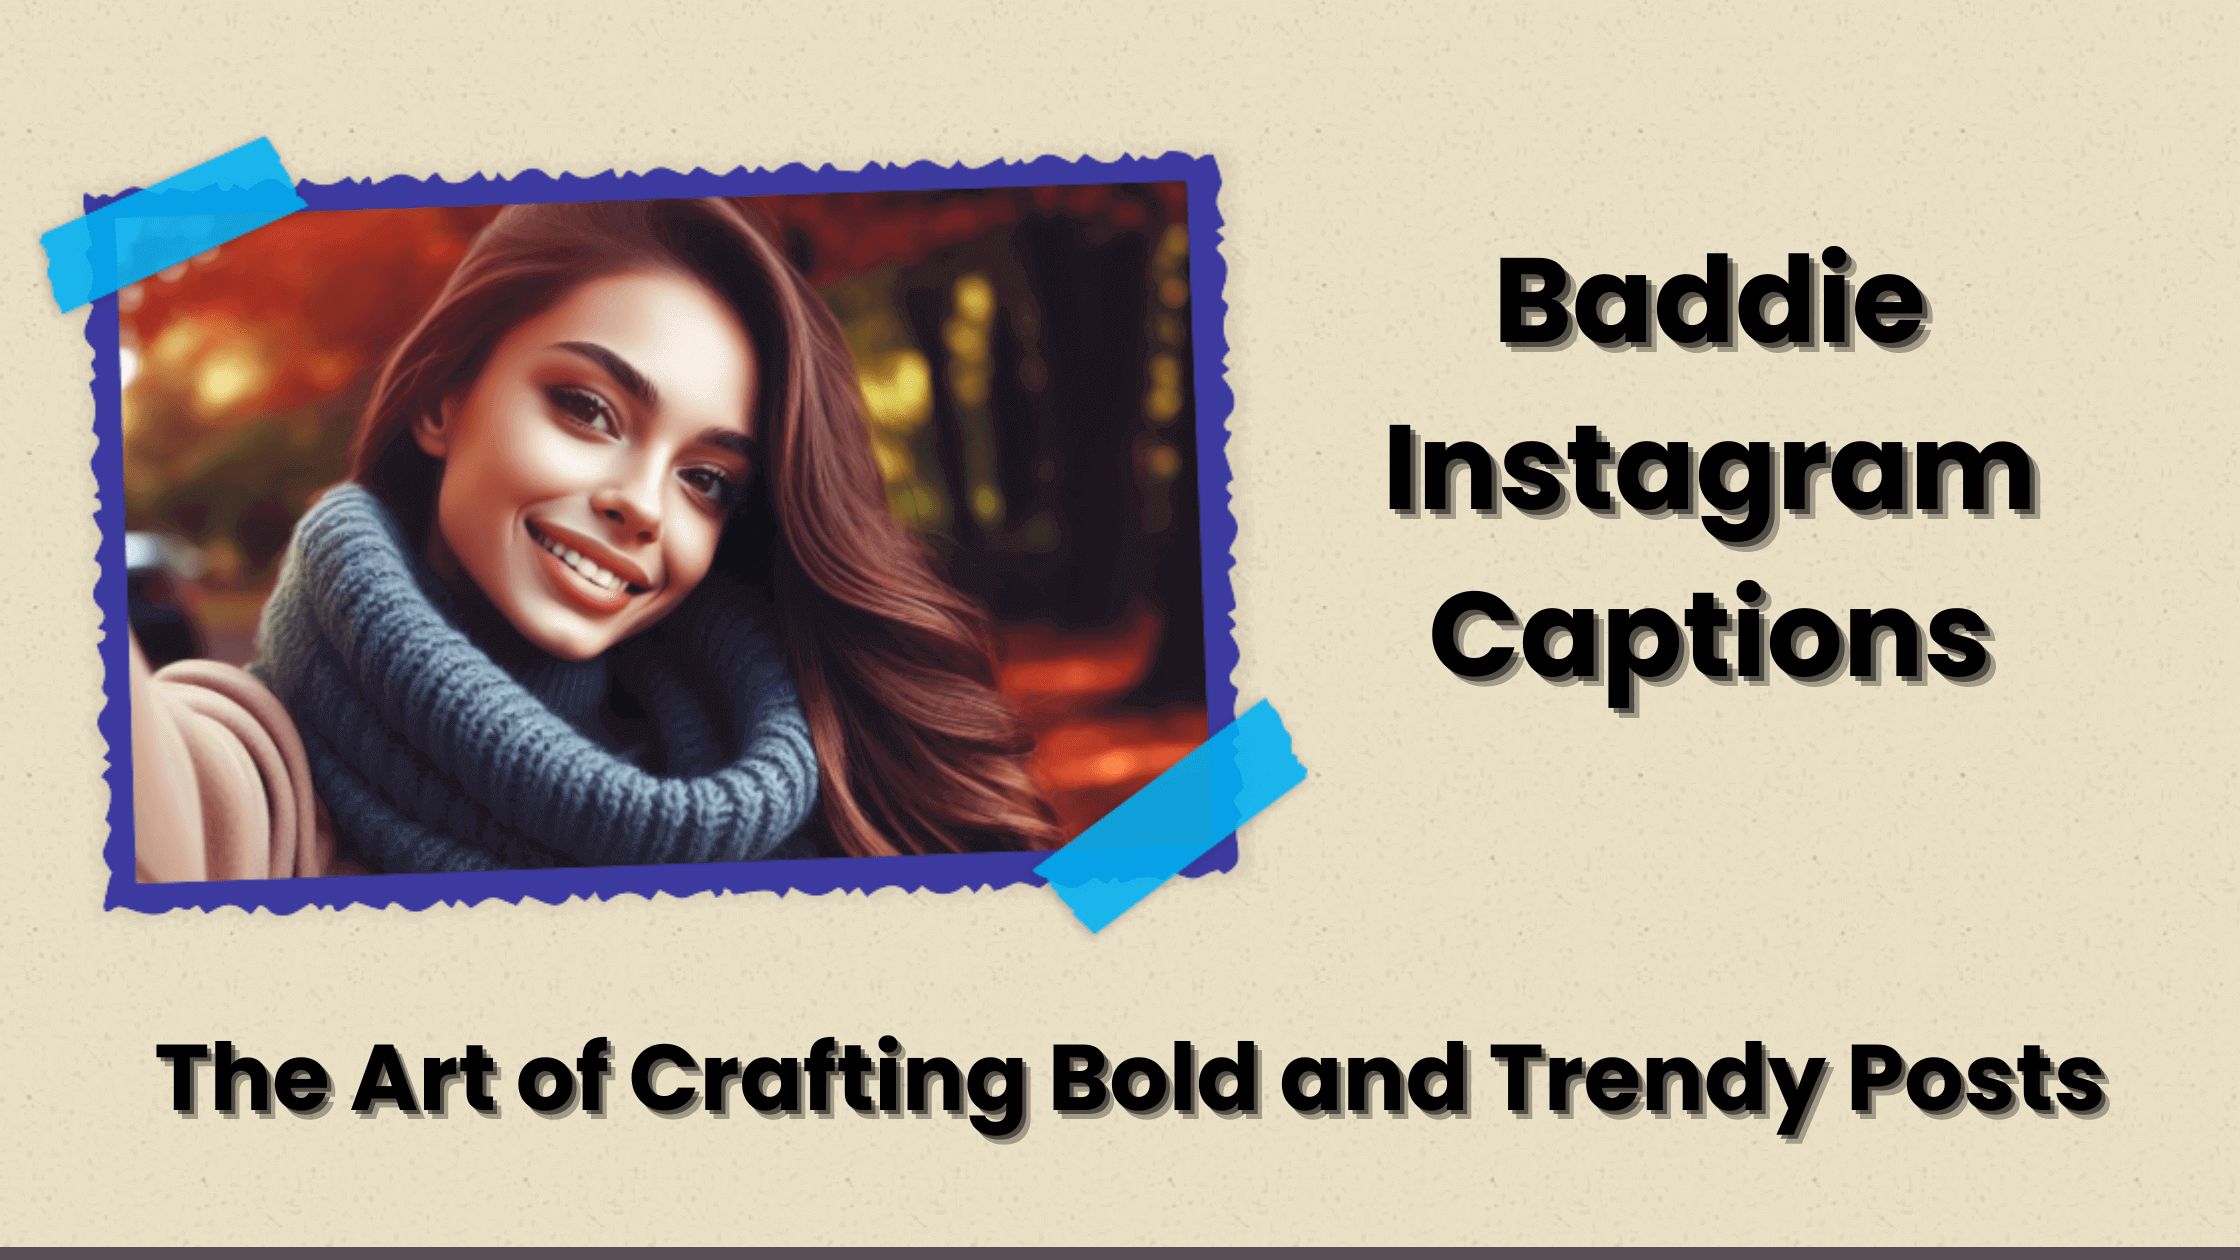 Baddie Instagram Captions: The Art of Crafting Bold and Trendy Posts